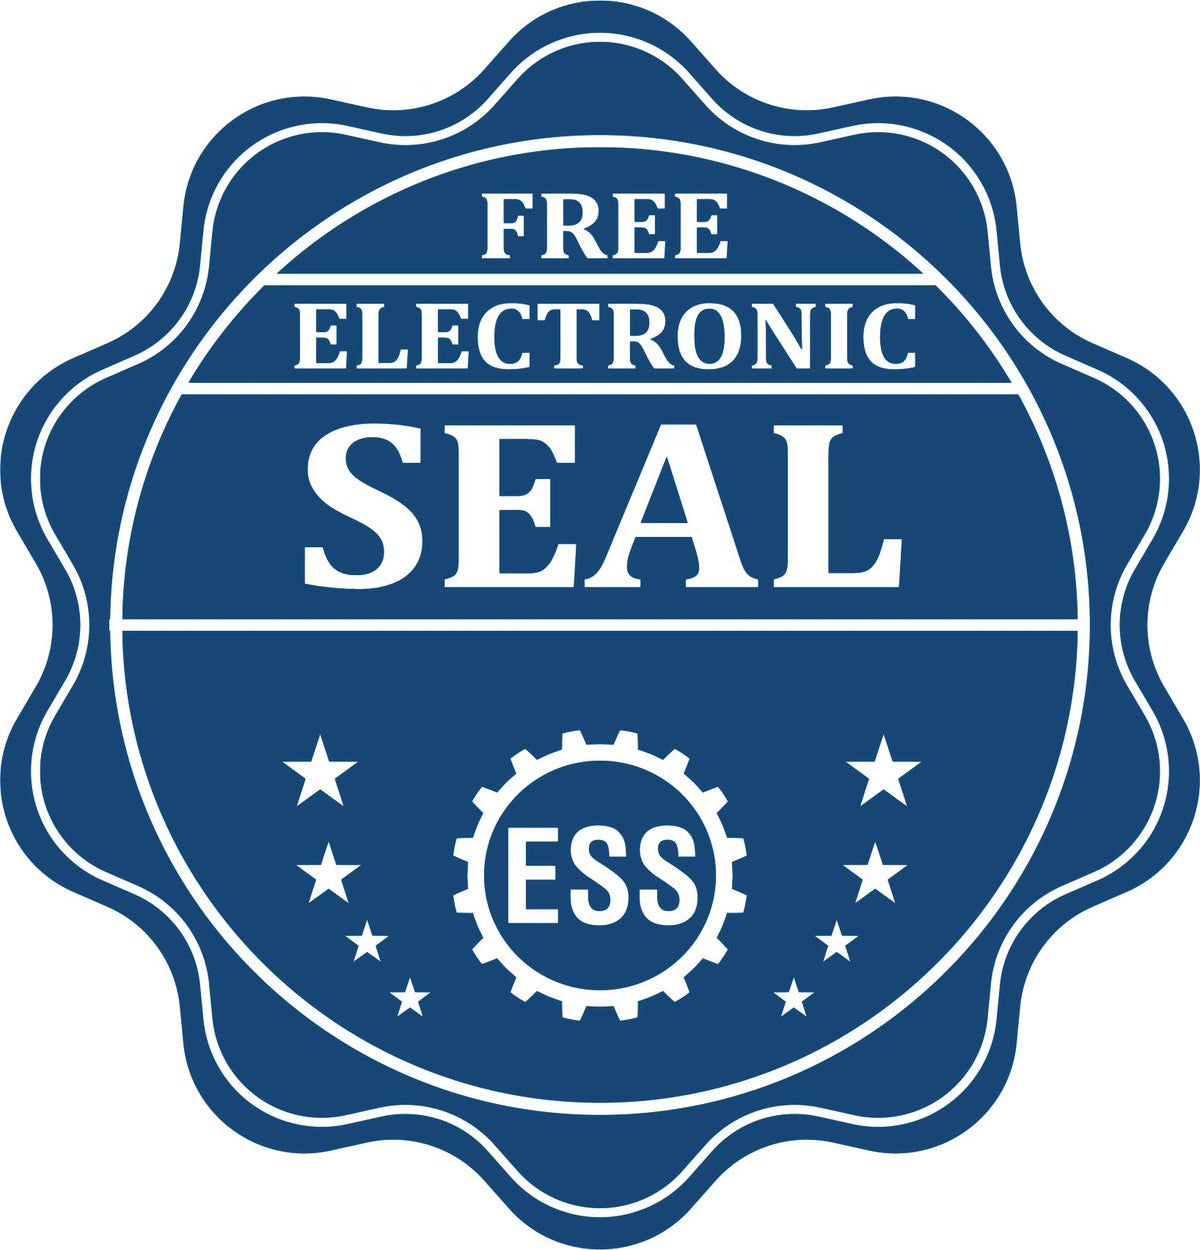 A badge showing a free electronic seal for the State of New York Extended Long Reach Geologist Seal with stars and the ESS gear on the emblem.